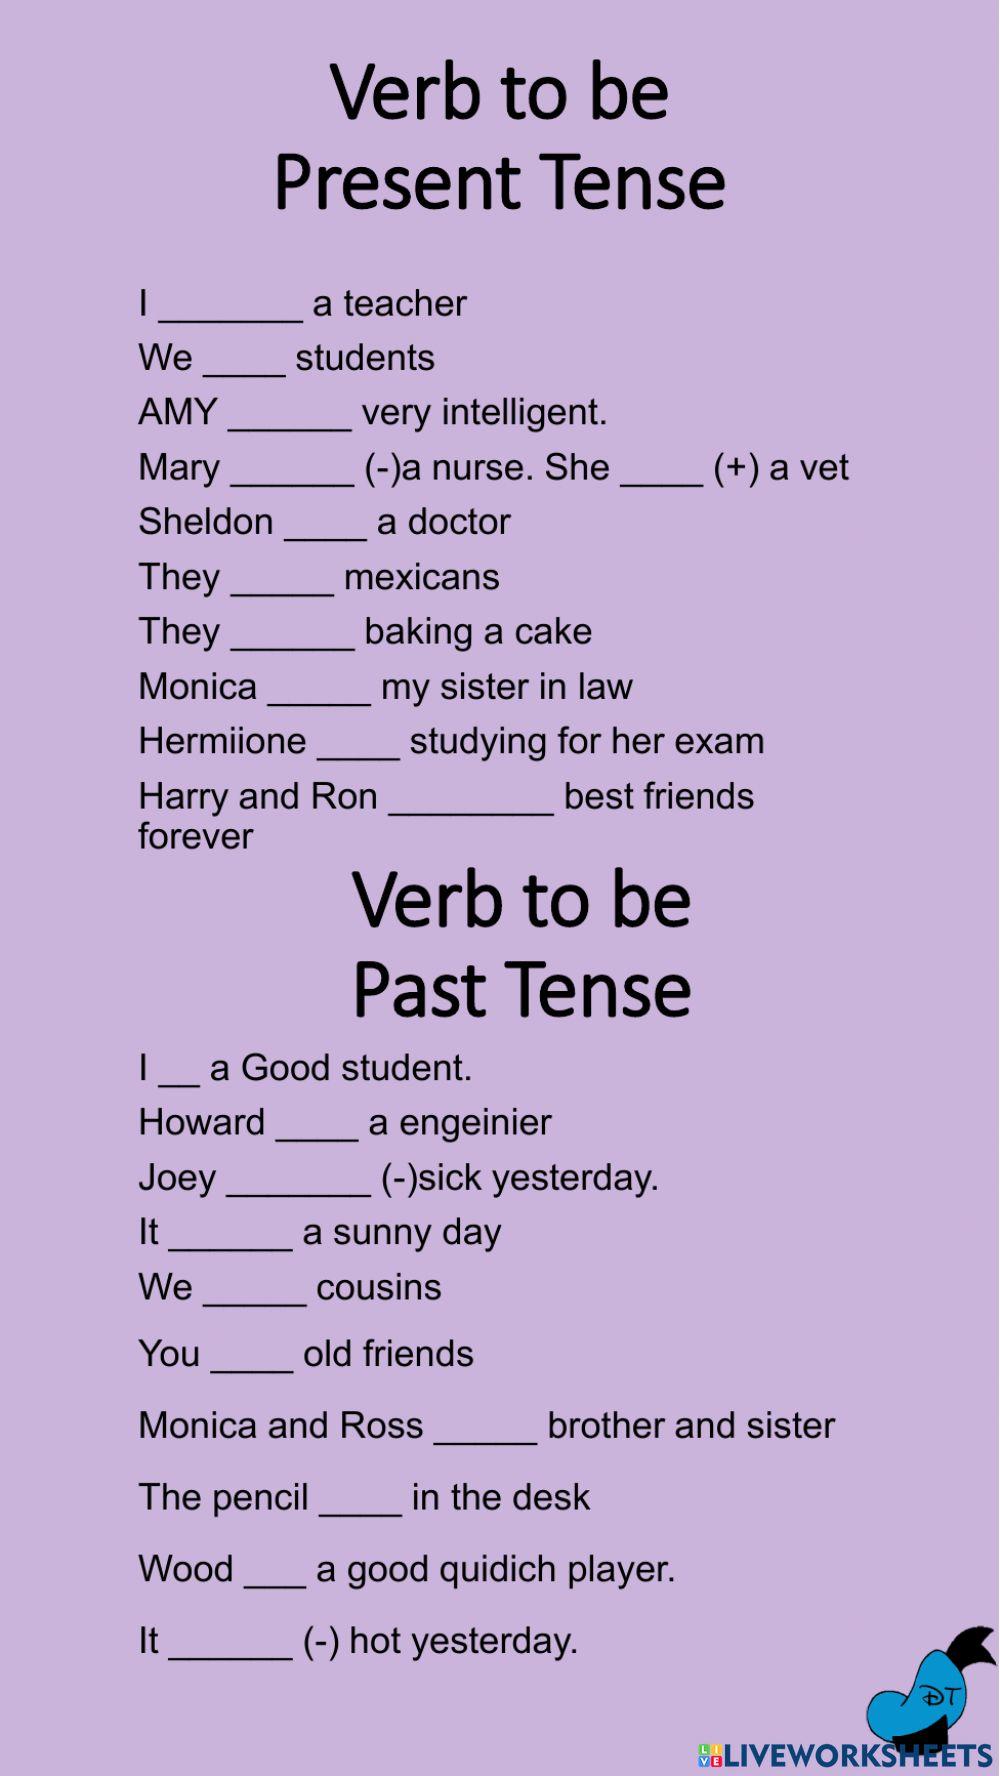 Verb to be in Present and Past